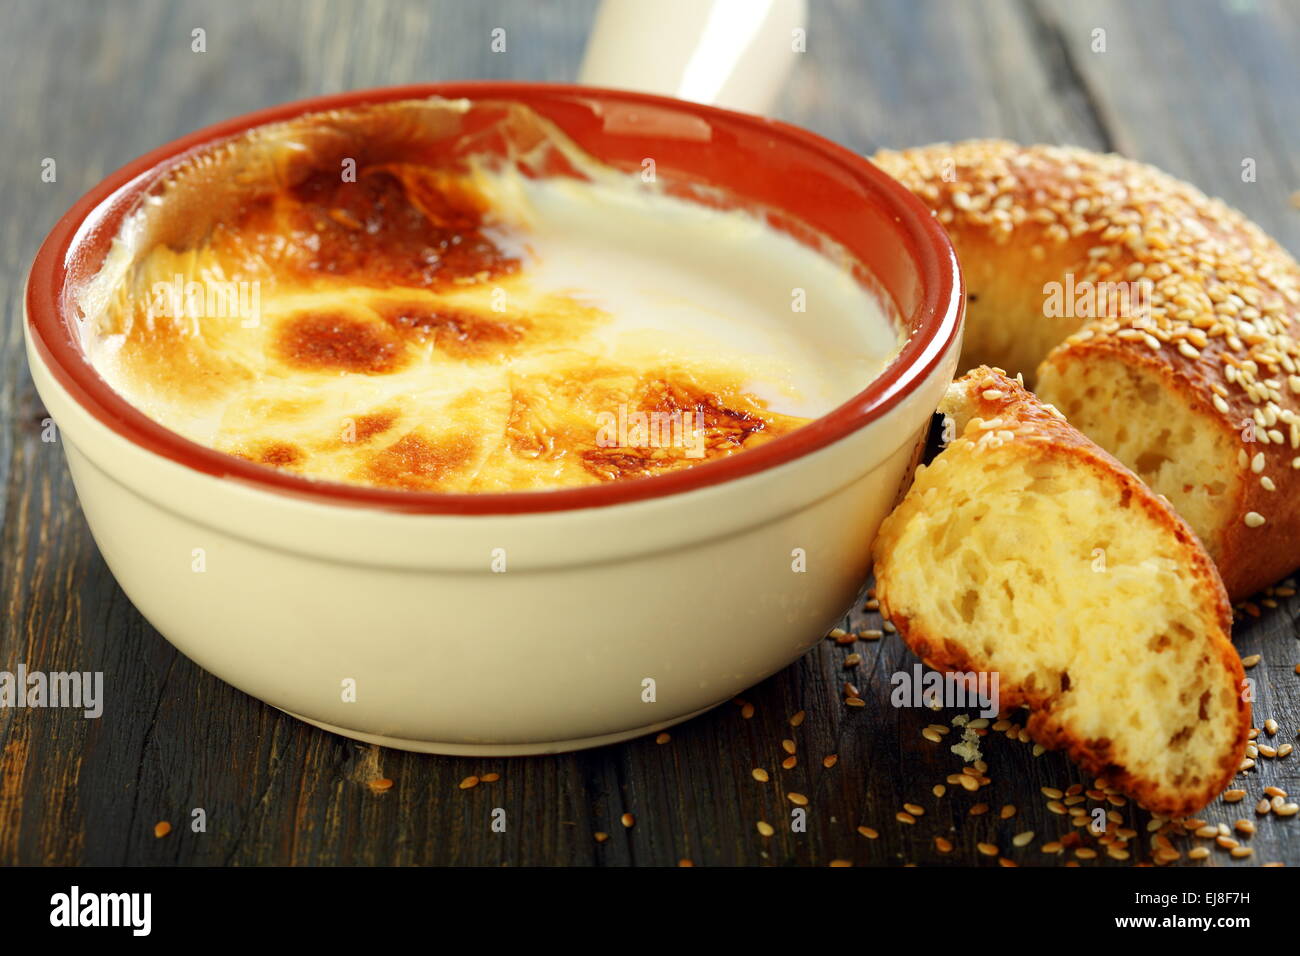 Homemade fermented baked milk and bagel. Stock Photo